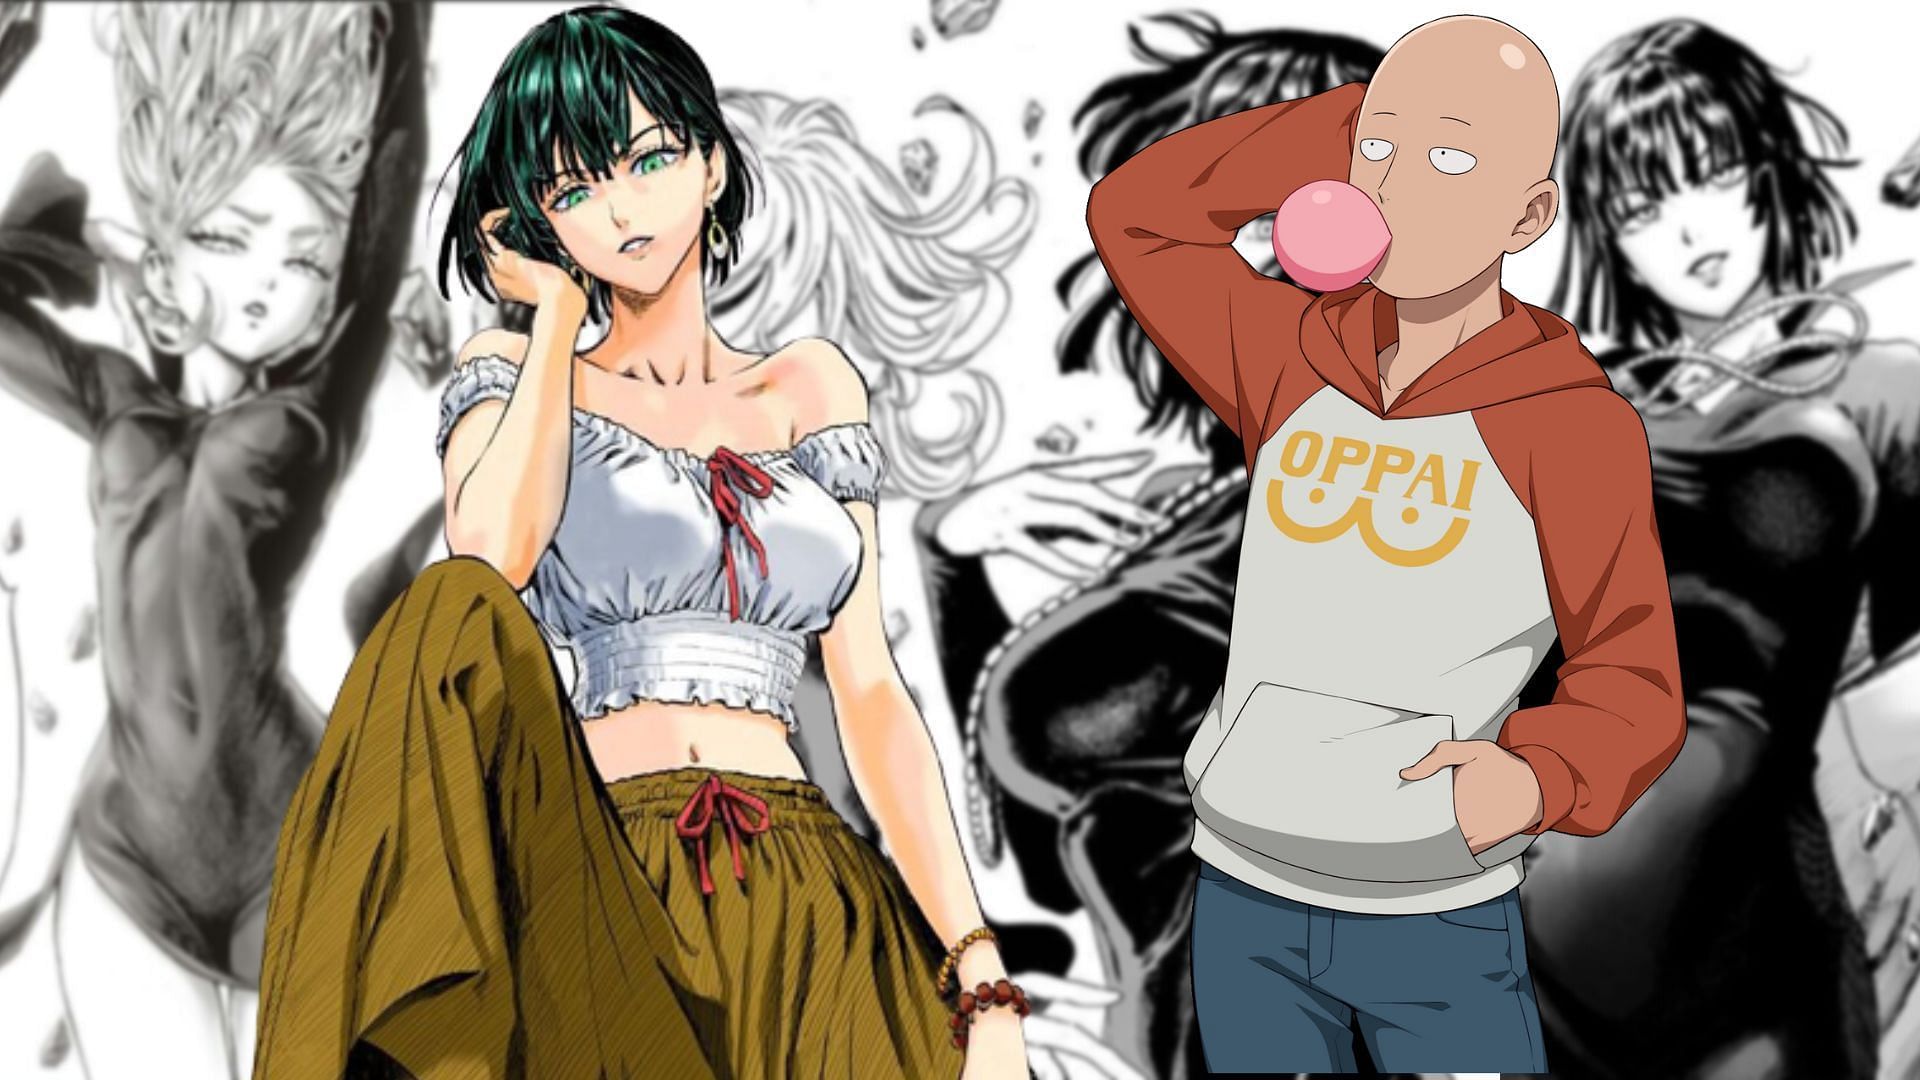 One Punch Man Chapter 173 review: BLAST'S SECRET FINALLY REVEALED